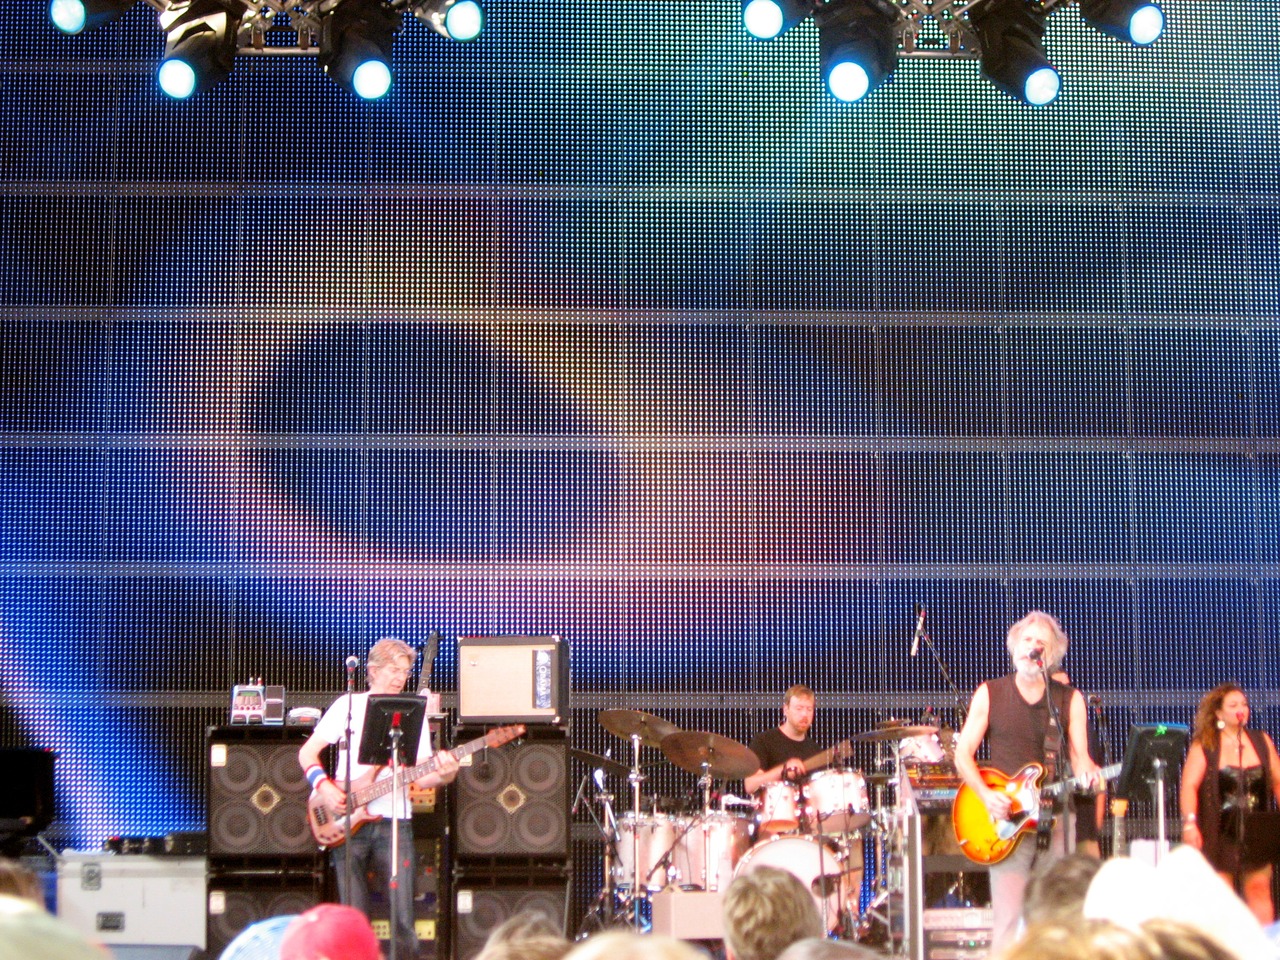 Furthur performing at the St. Augustine Amphitheatre during the first set.